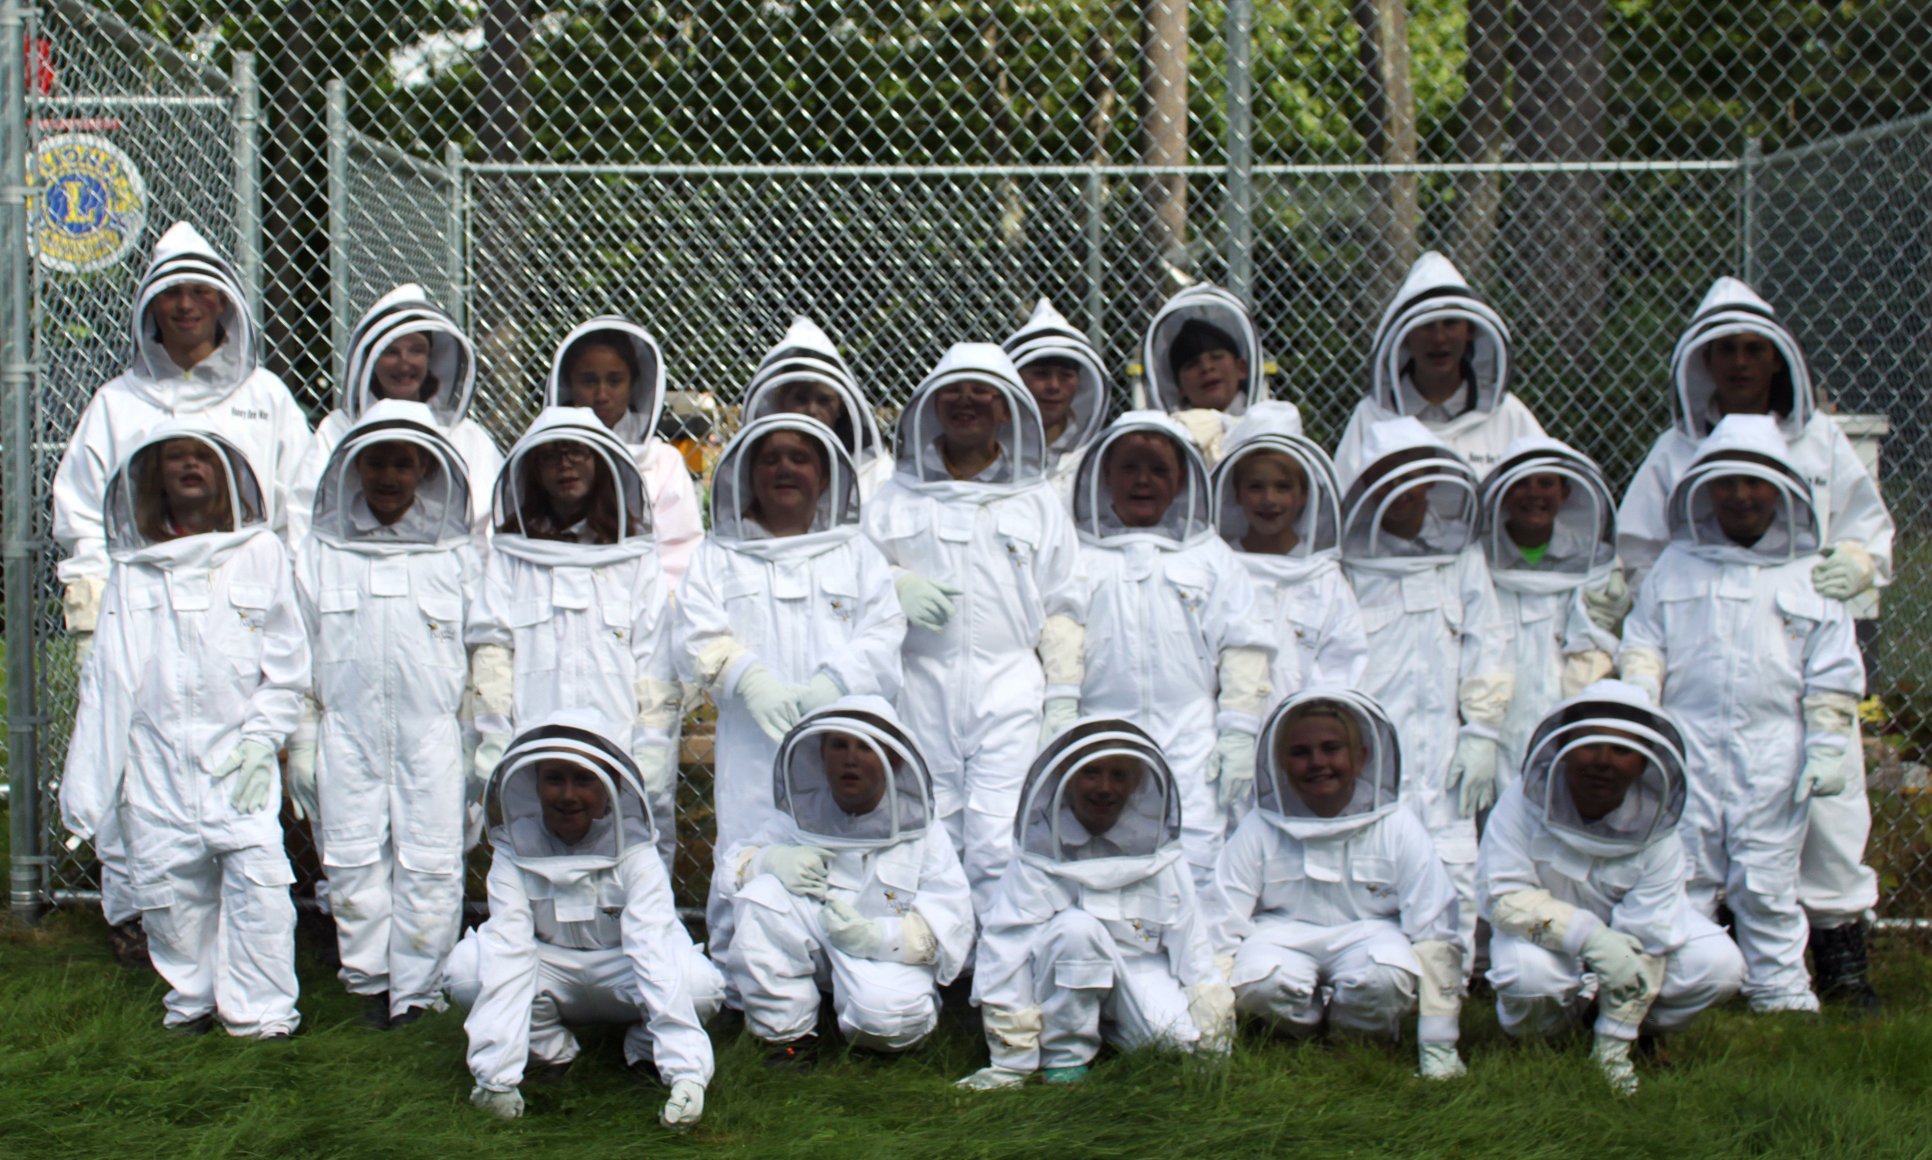 Mr. Wilfer's Students Work With Honey Bees